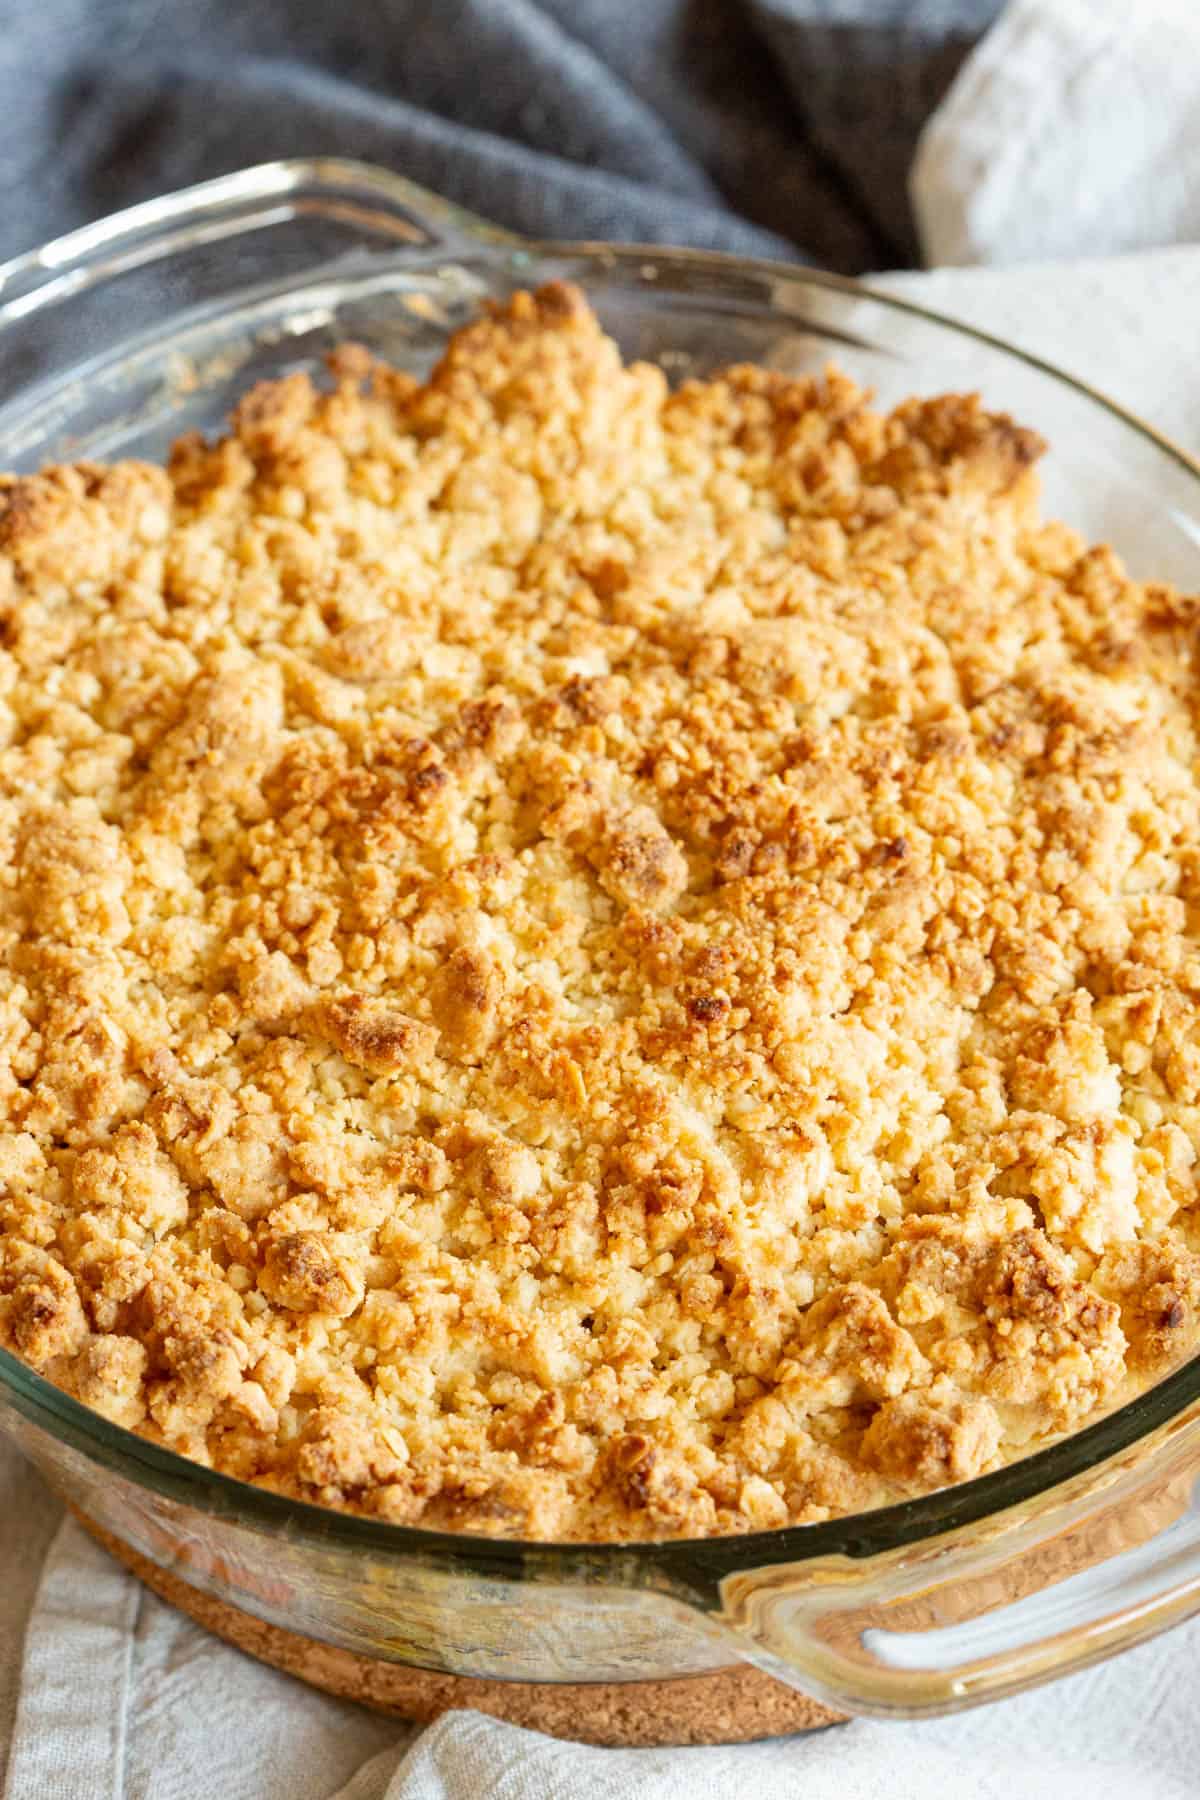 A crisp golden crust on a perfectly baked persimmon crumble.